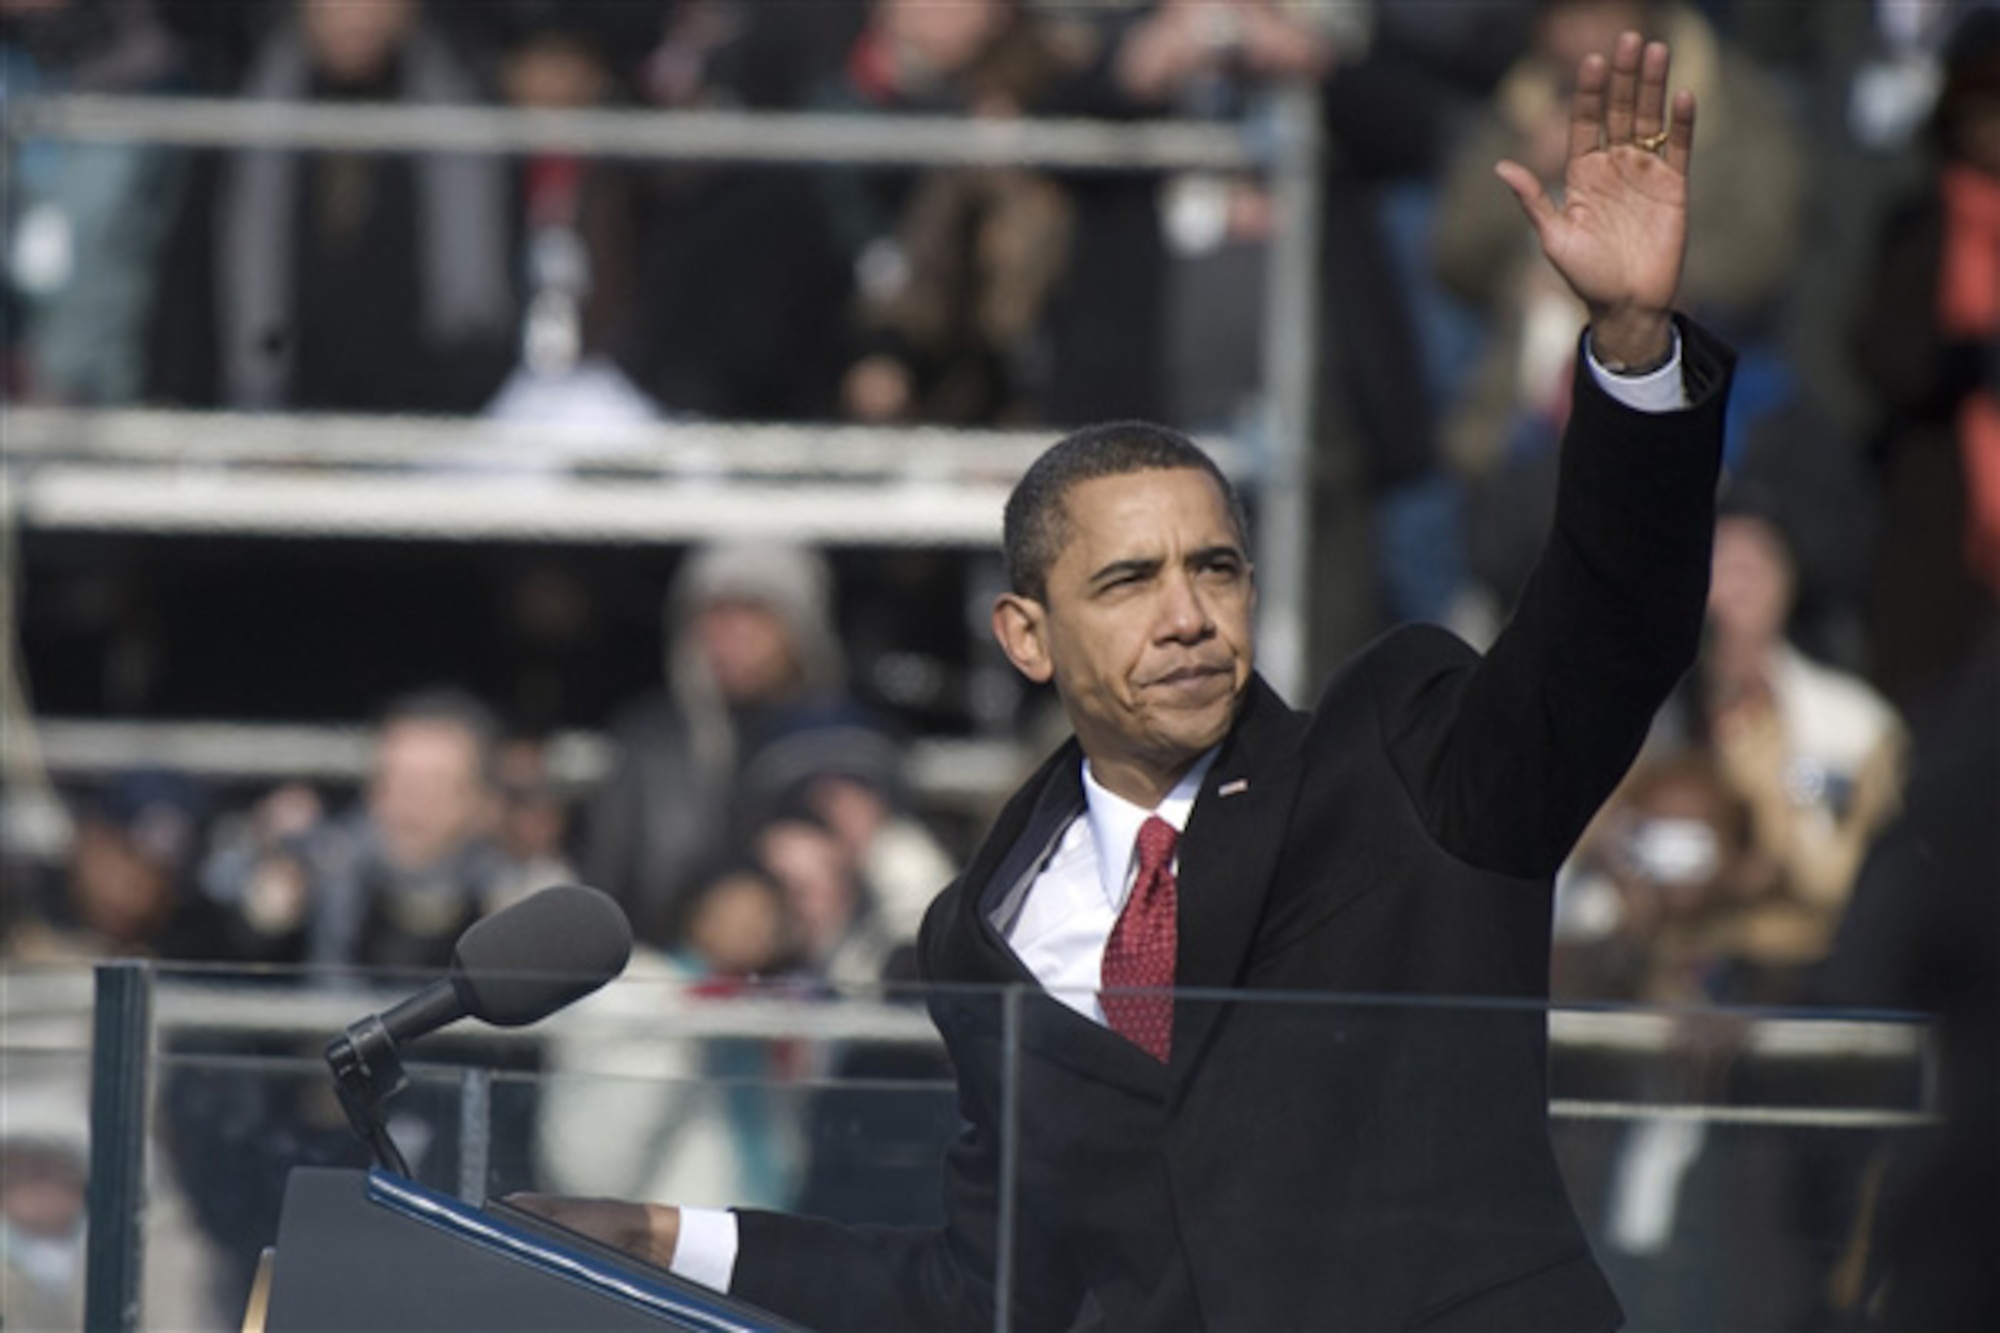 President Barack Obama waves to the crowd at the conclusion of his inaugural address Jan. 20 in Washington, D.C. The 44th president of the United States assumed his duties as commander in chief and vowed not to waver in defending America. (Defense Department photo/Navy Petty Officer 1st Class Chad J. McNeeley)
